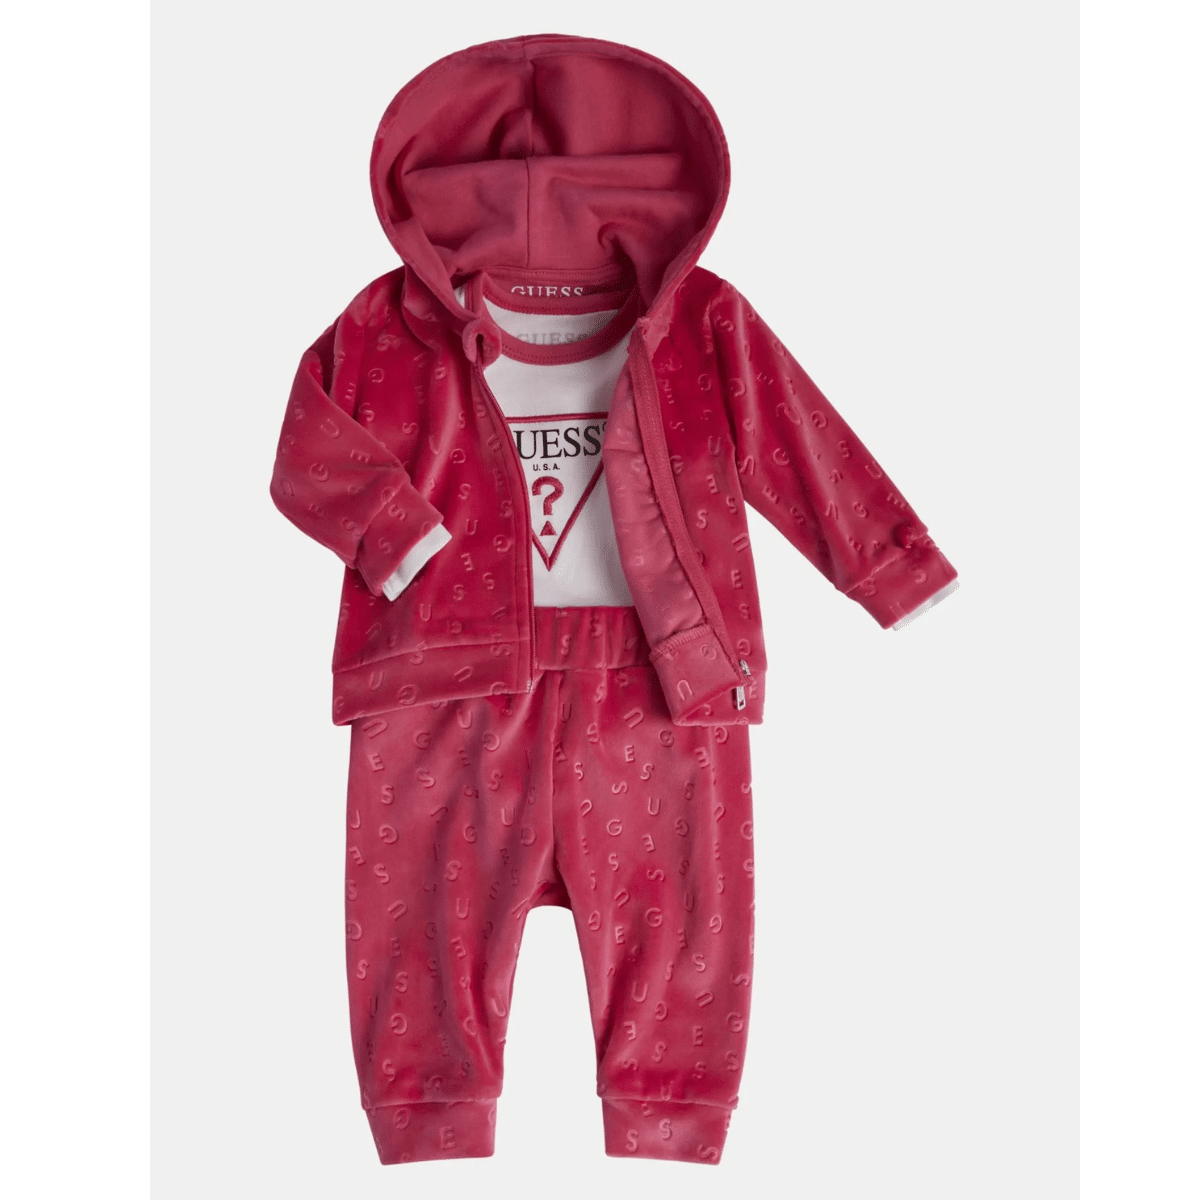 Guess girls baby red outfit